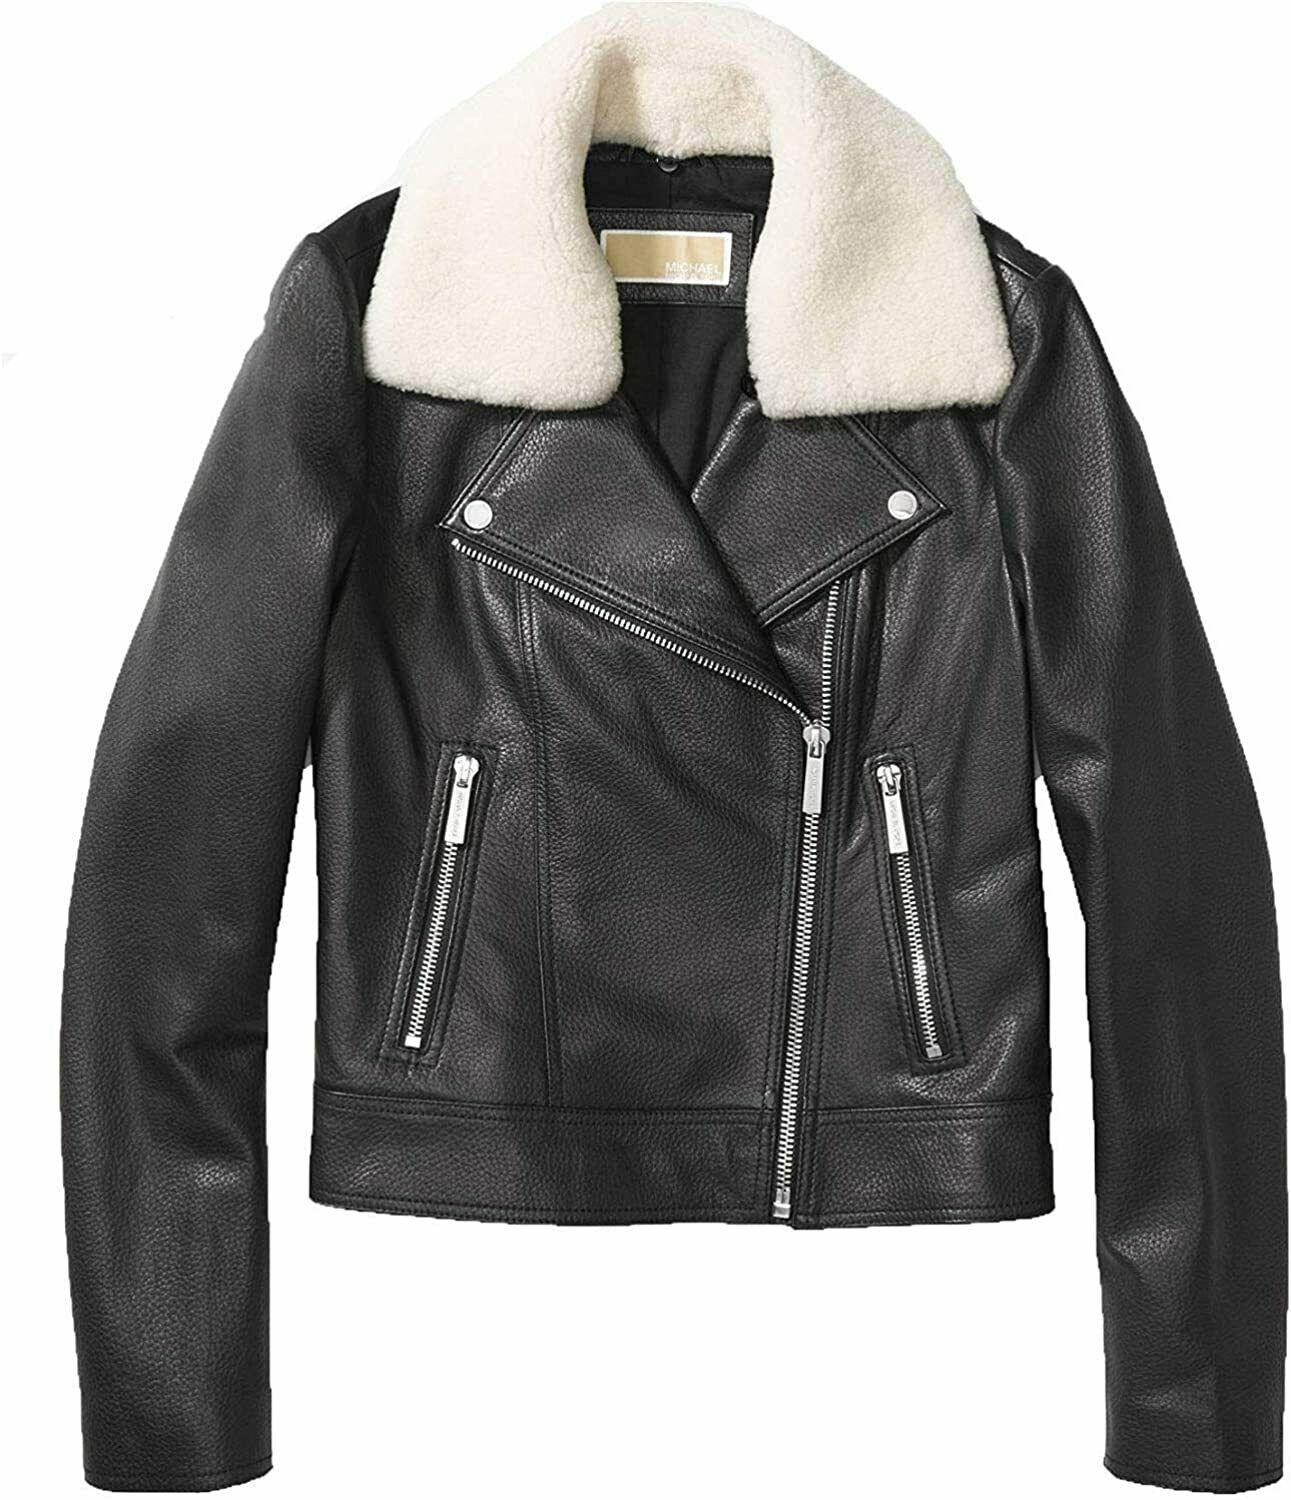 Michael Kors Genuine Soft leather Jacket with Shearling Collar Plus Size 2X - SVNYFancy